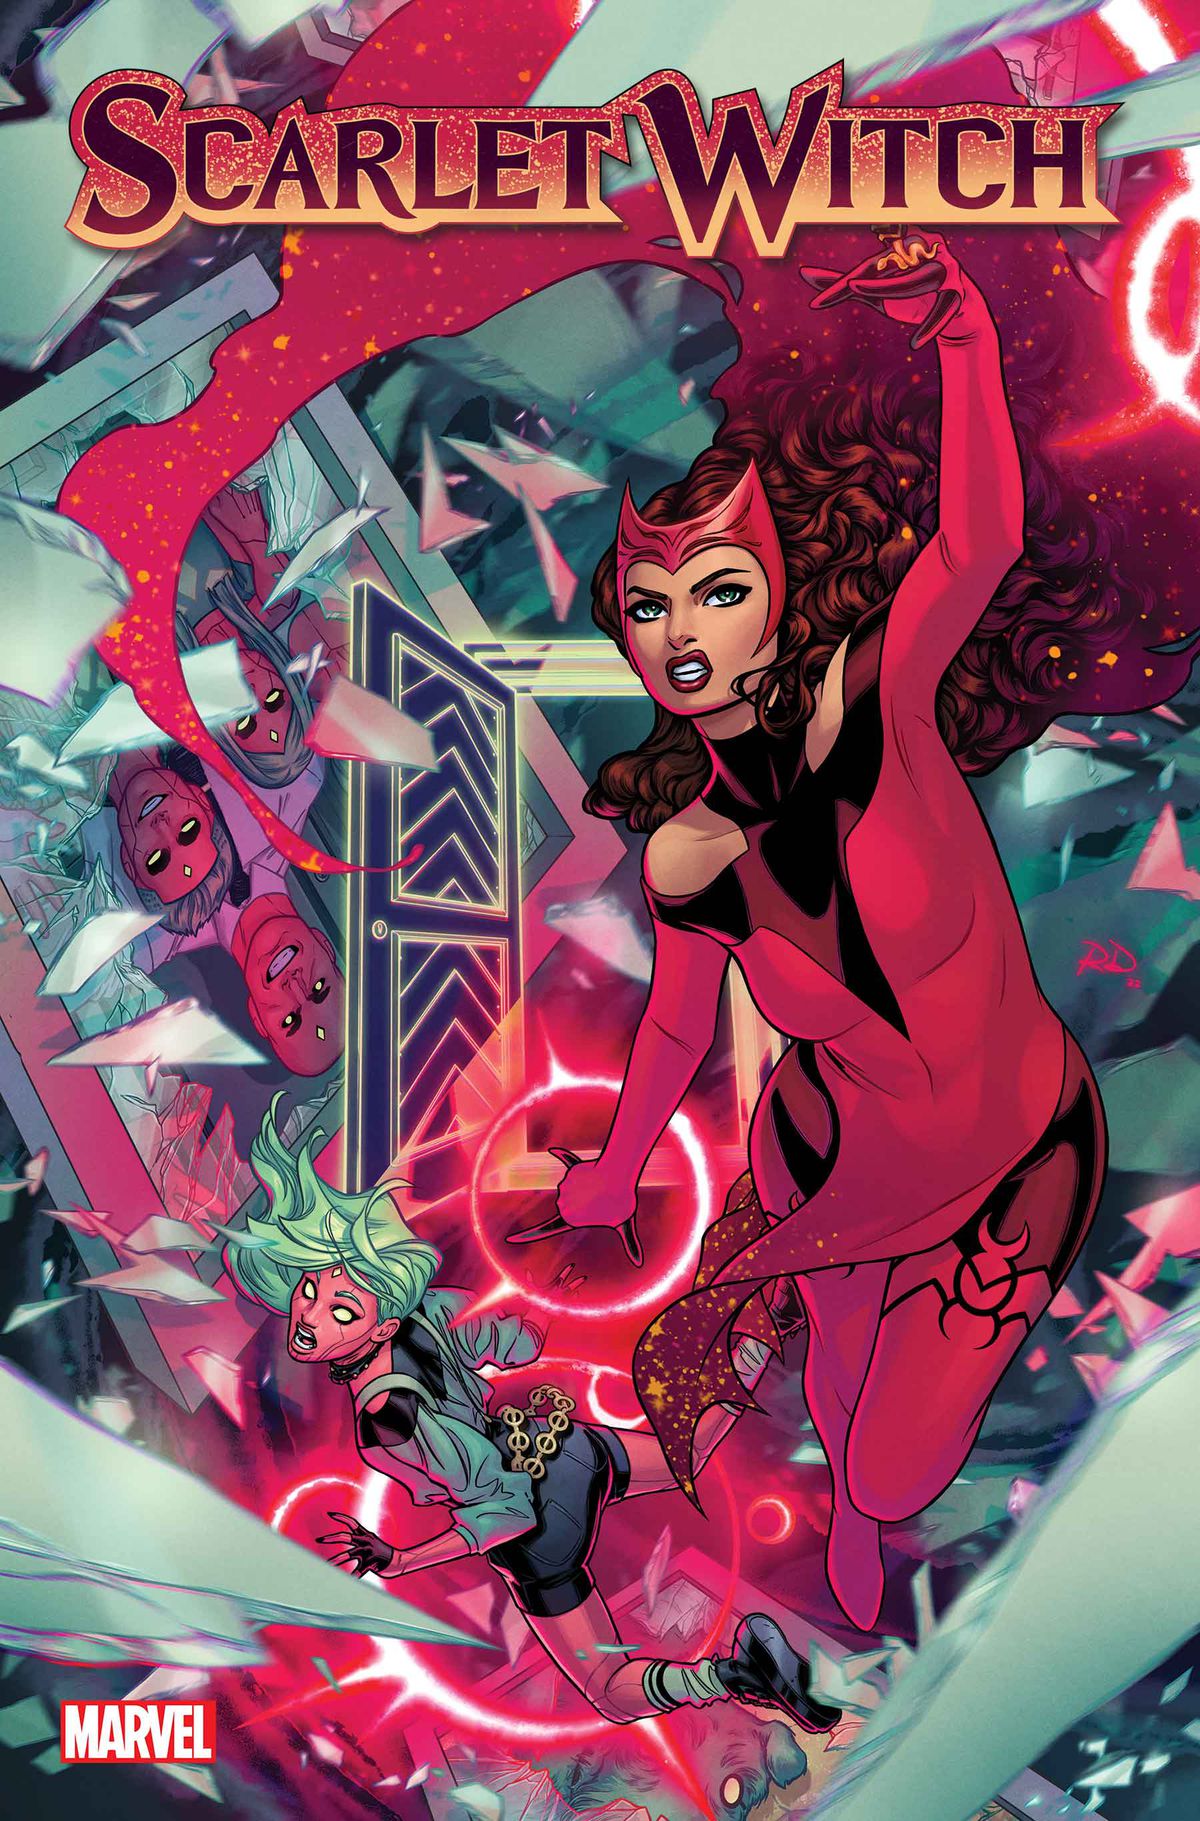 The Scarlet Witch and Viv Vision fly through a violent collage of mirror shards depicting the Vision family on the cover of Scarlet Witch #2 (2023).